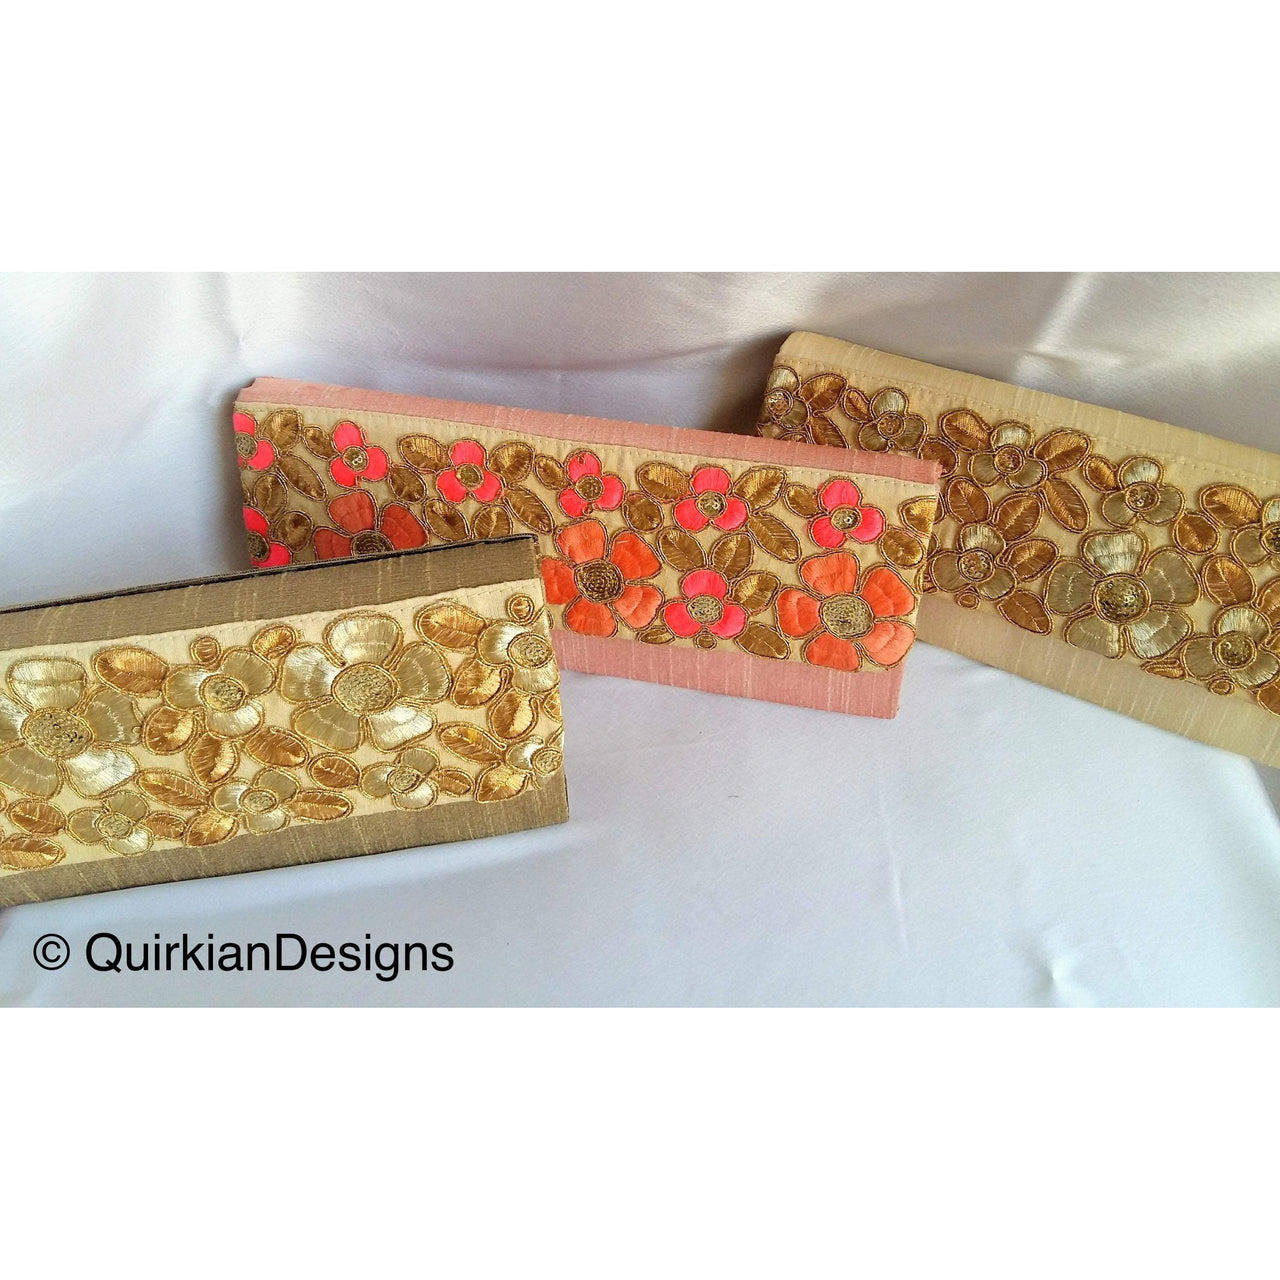 Coral Pink Fabric Clutch Purse With Pink And Gold Intricate Floral Embroidery, Wedding Clutch, Party Bag